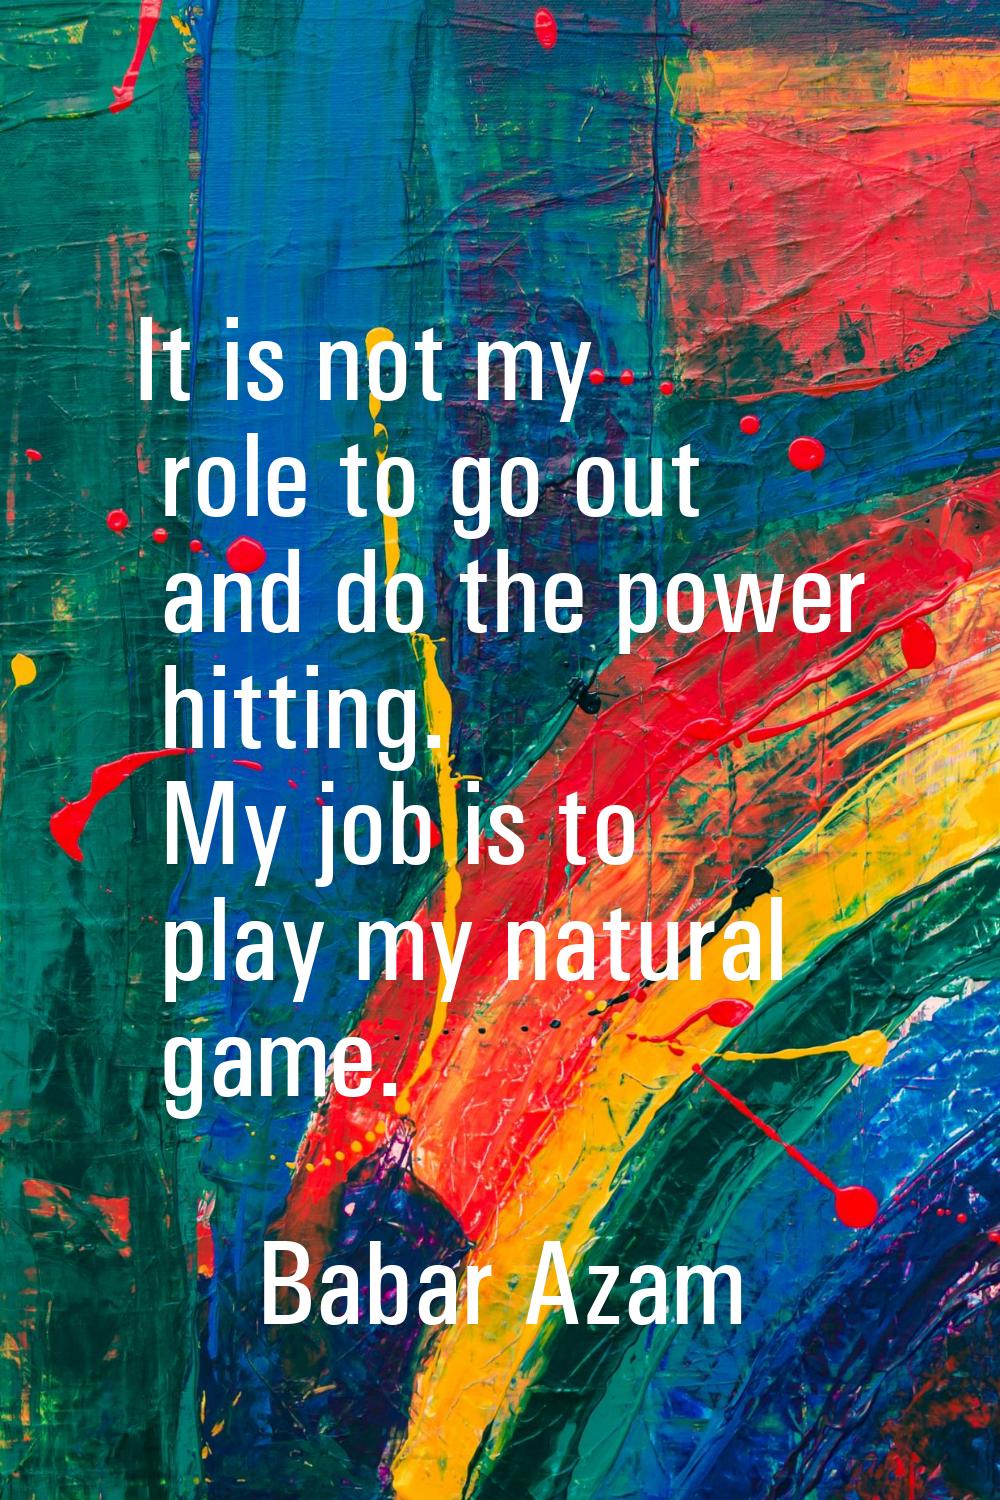 It is not my role to go out and do the power hitting. My job is to play my natural game.